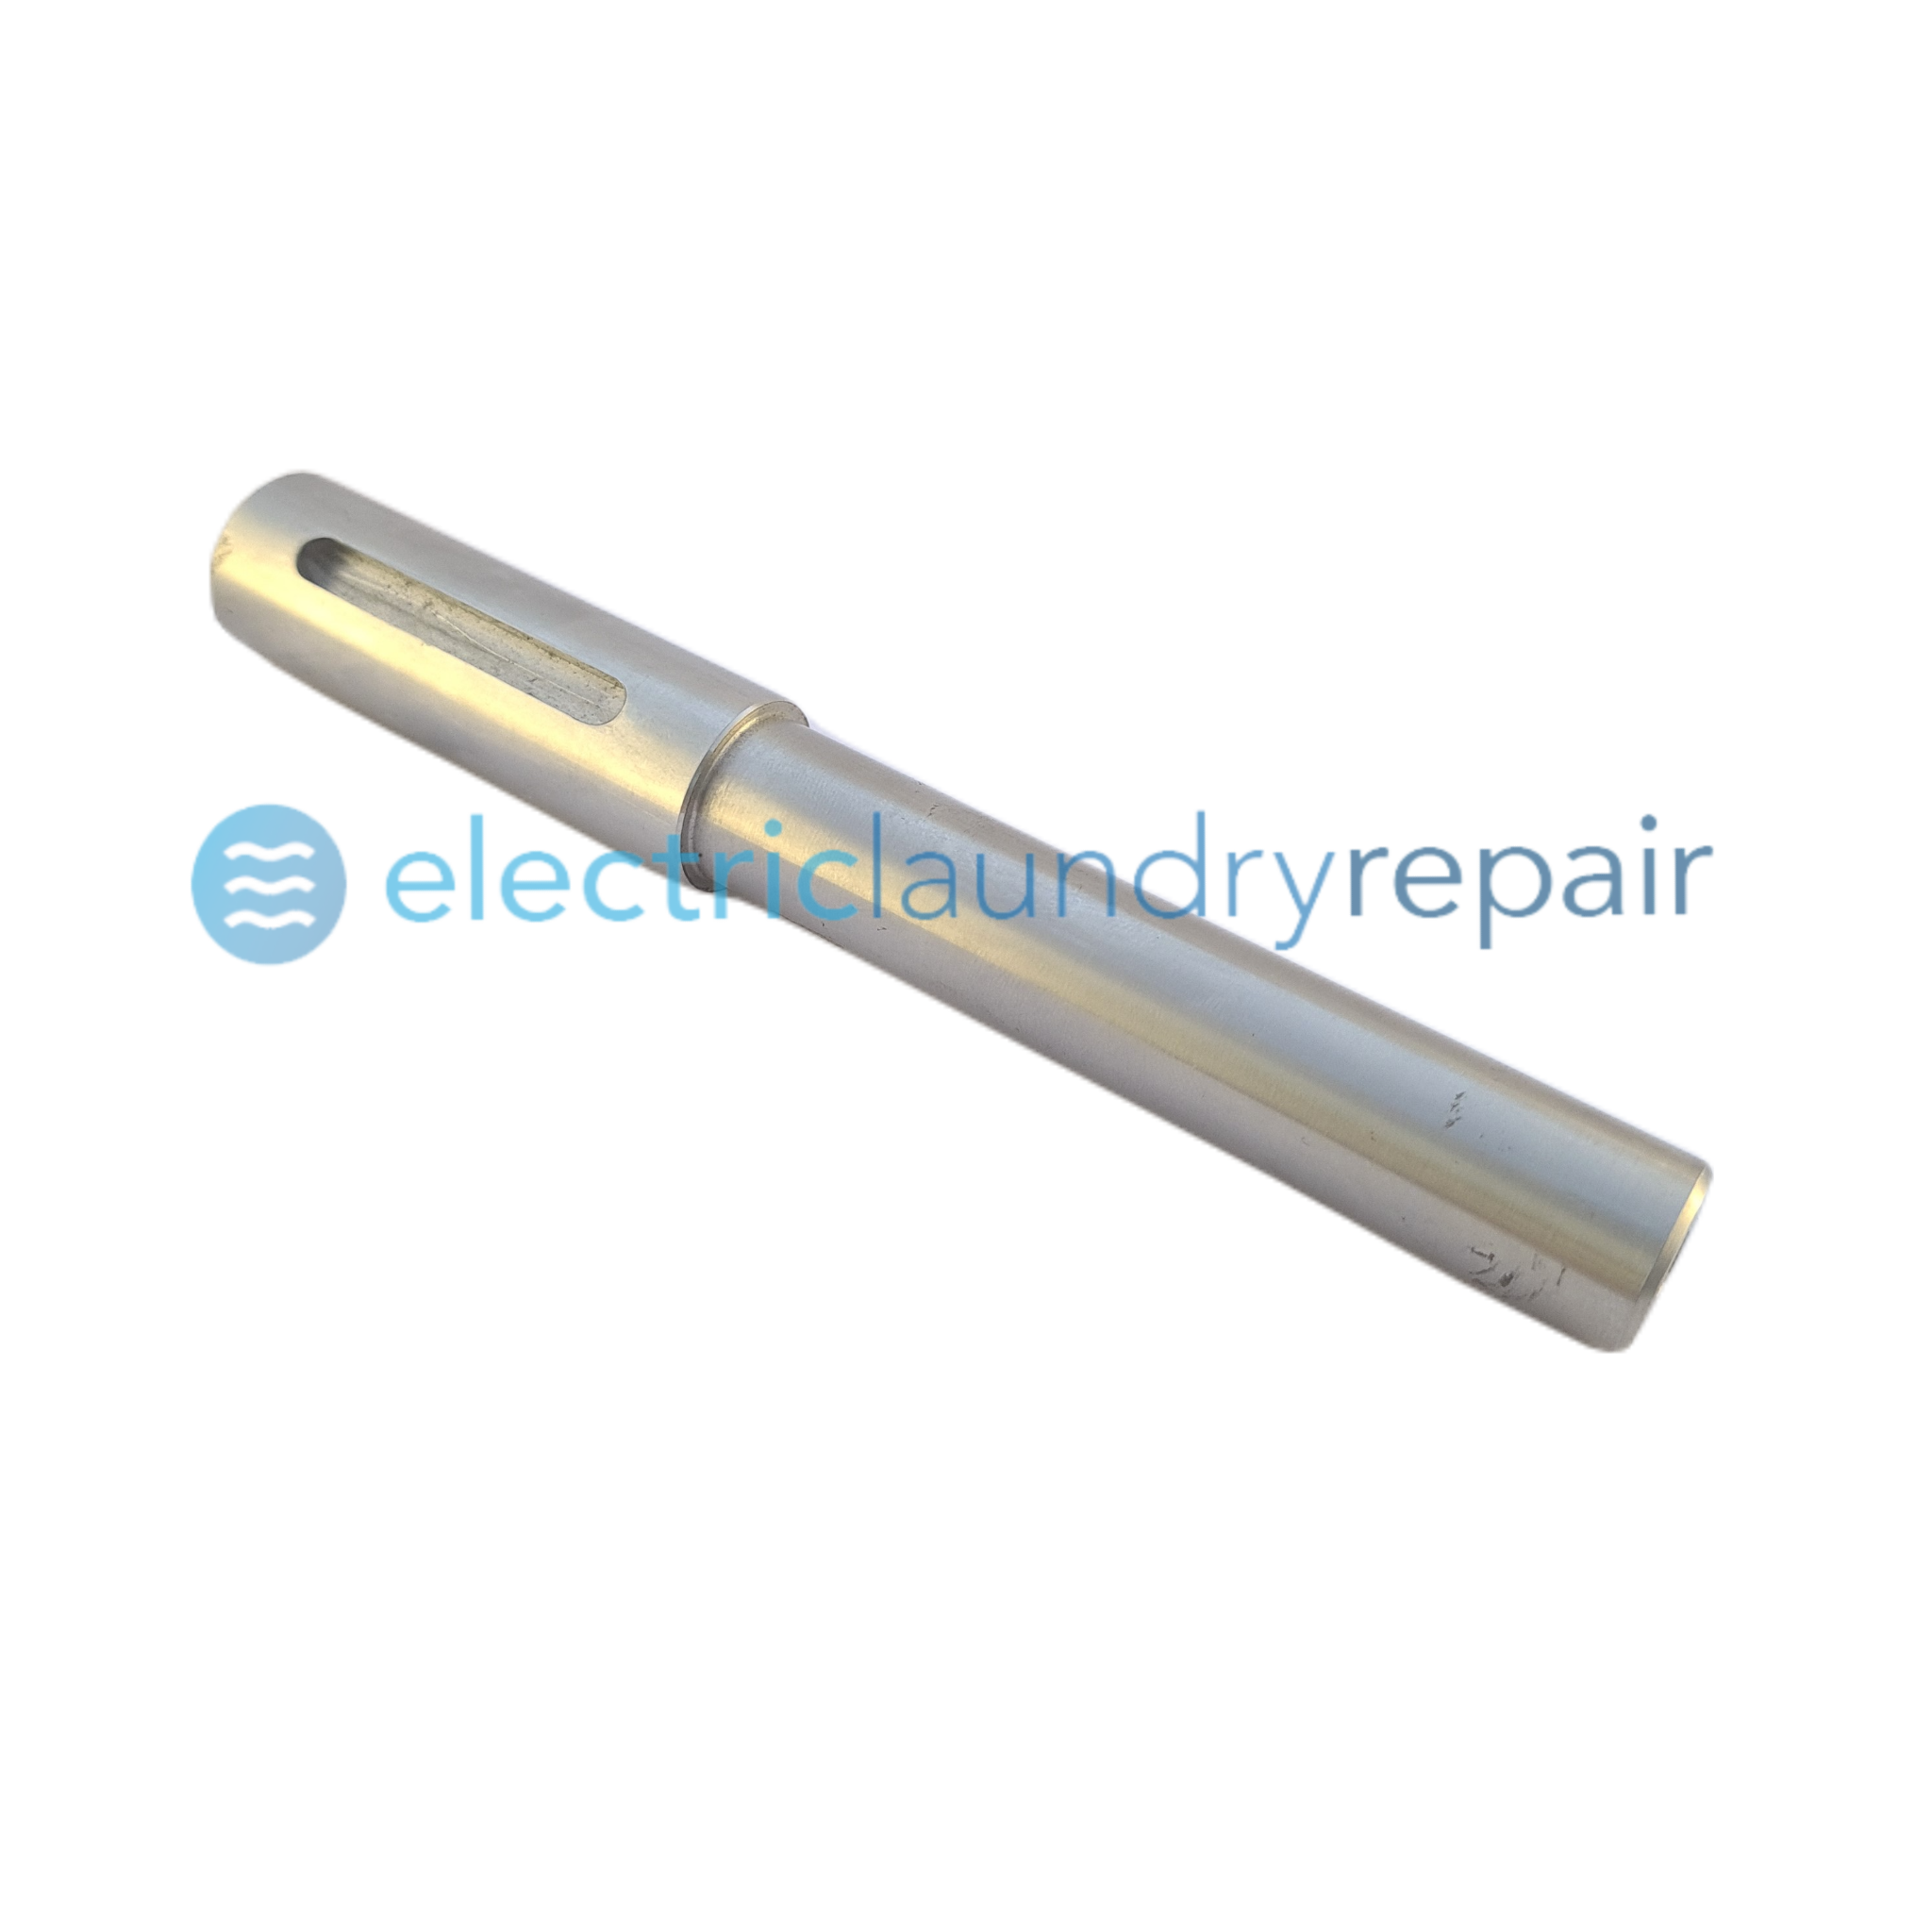 ADC Dryer Idler Shaft (15-75) Replacement Part www.electriclaundryrepair.co.nz